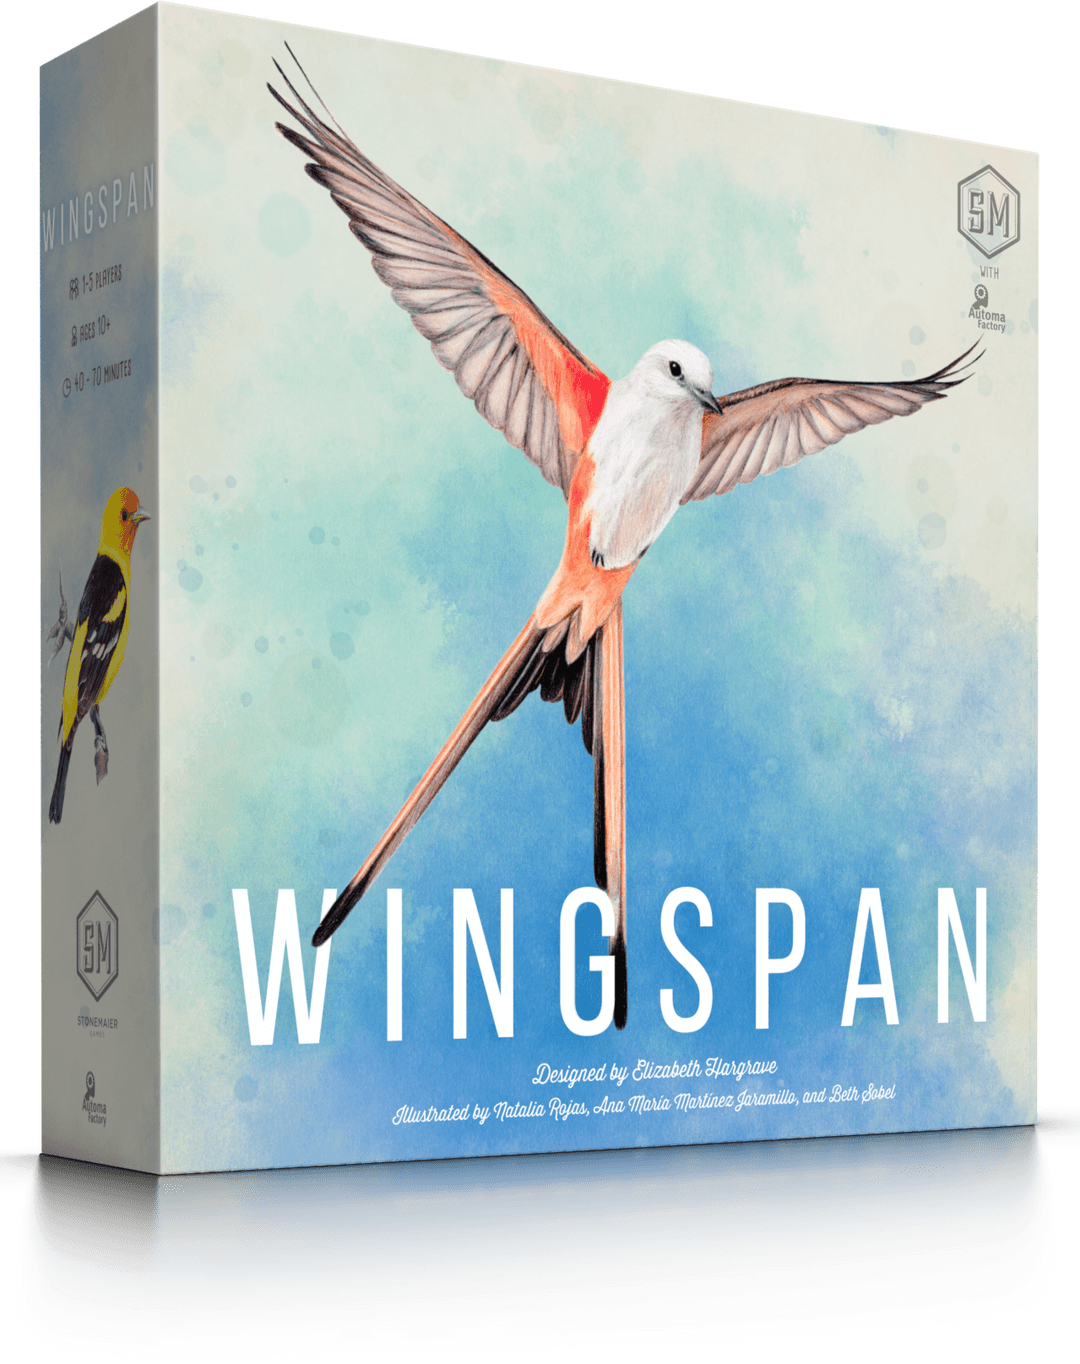 Wingspan - The Fourth Place